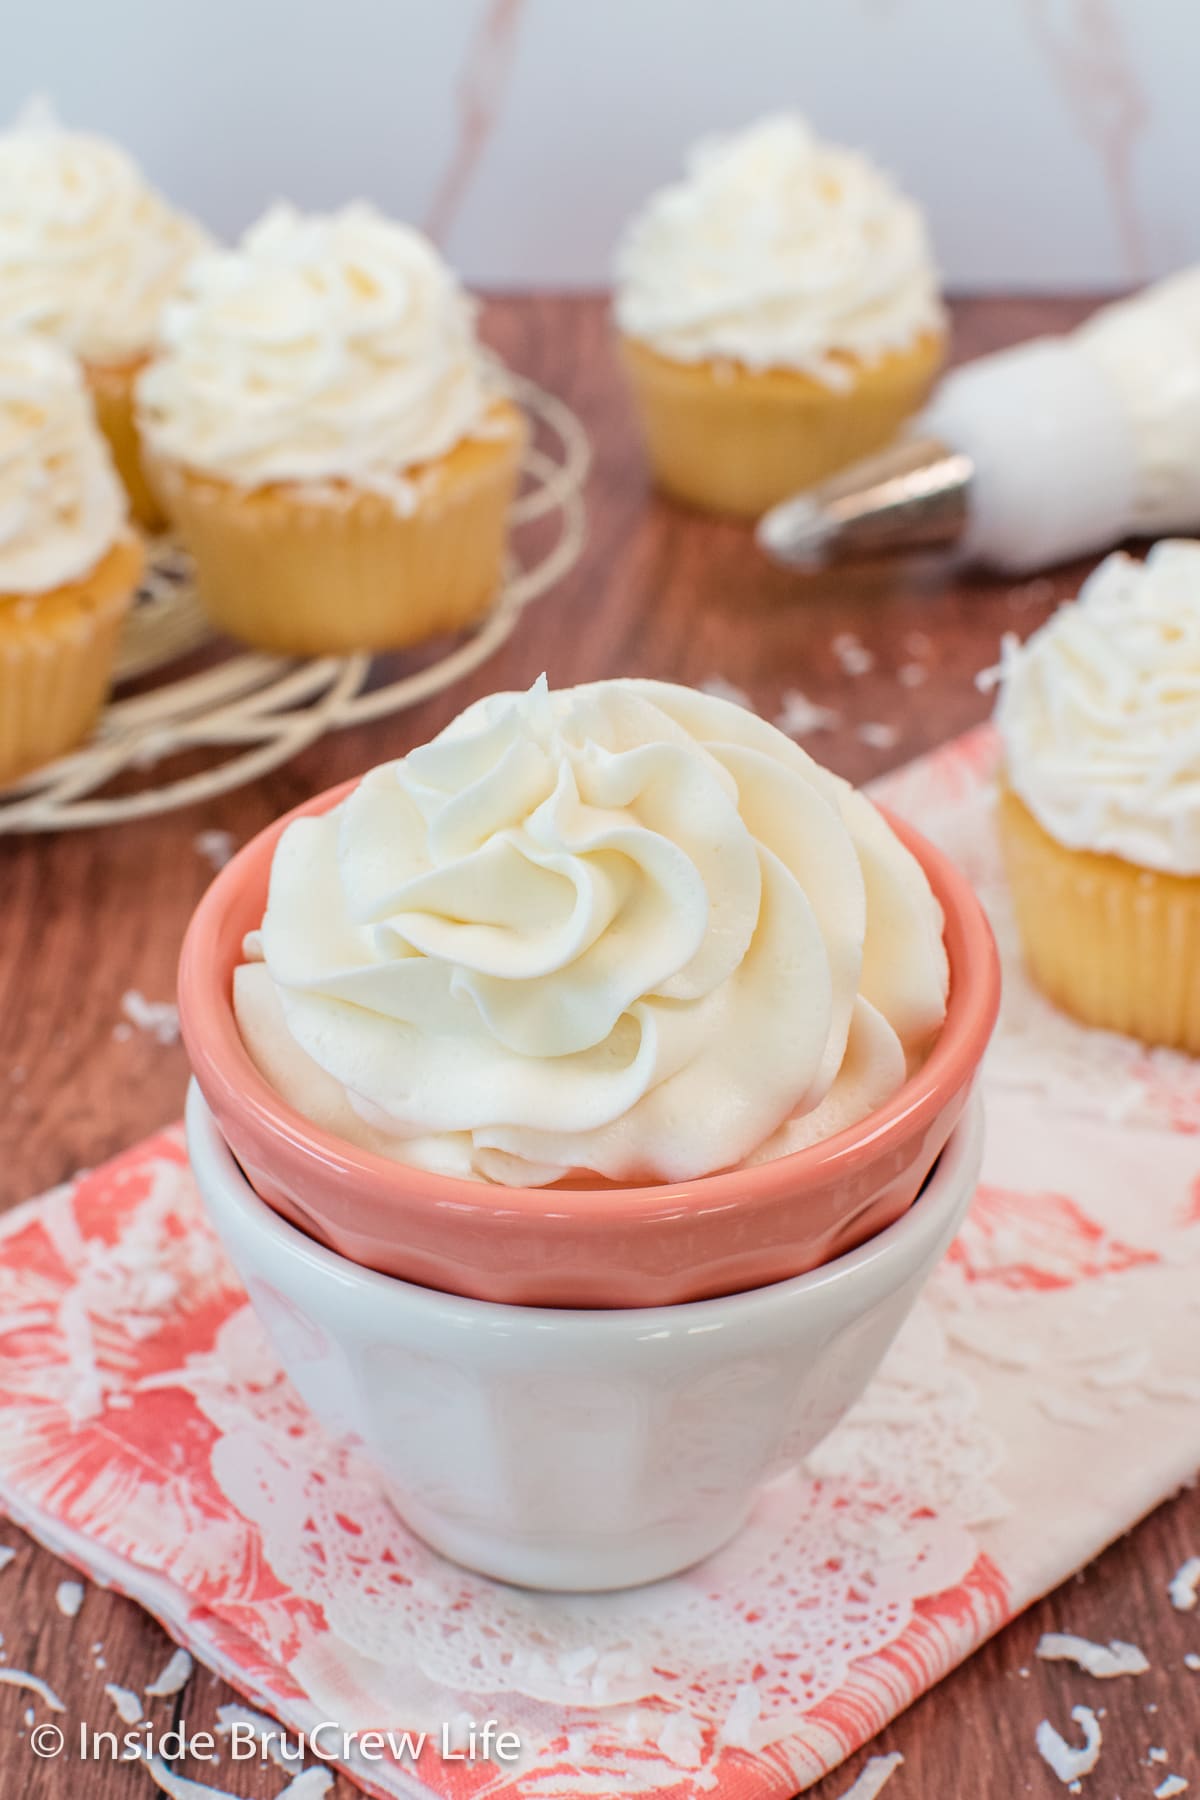 A bowl filled with a large swirl of creamy coconut frosting.